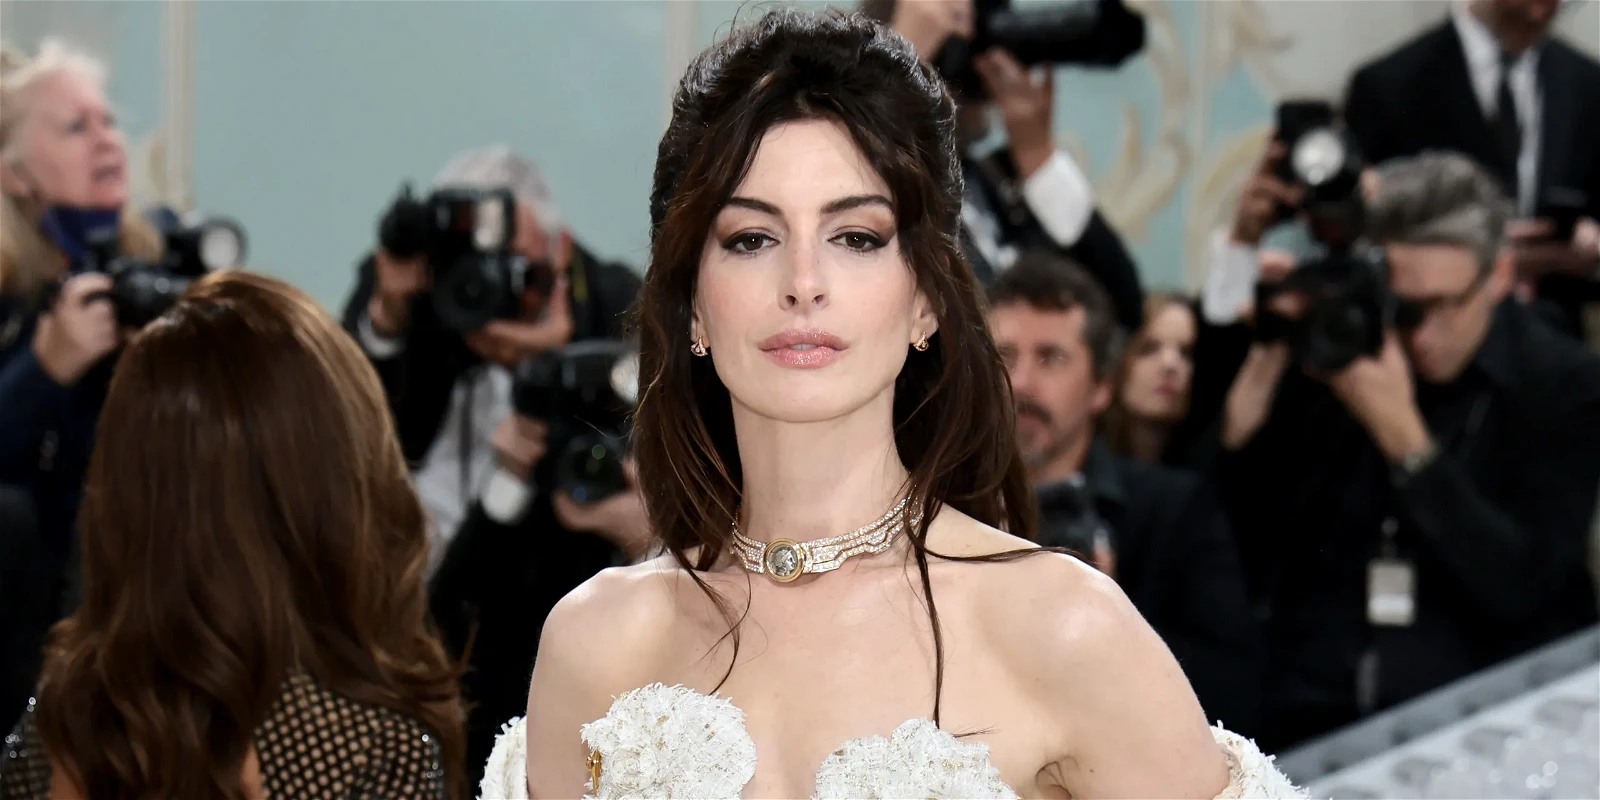 “Wherever they go, they’re in a pack”: Anne Hathaway Felt Like a “Man ...